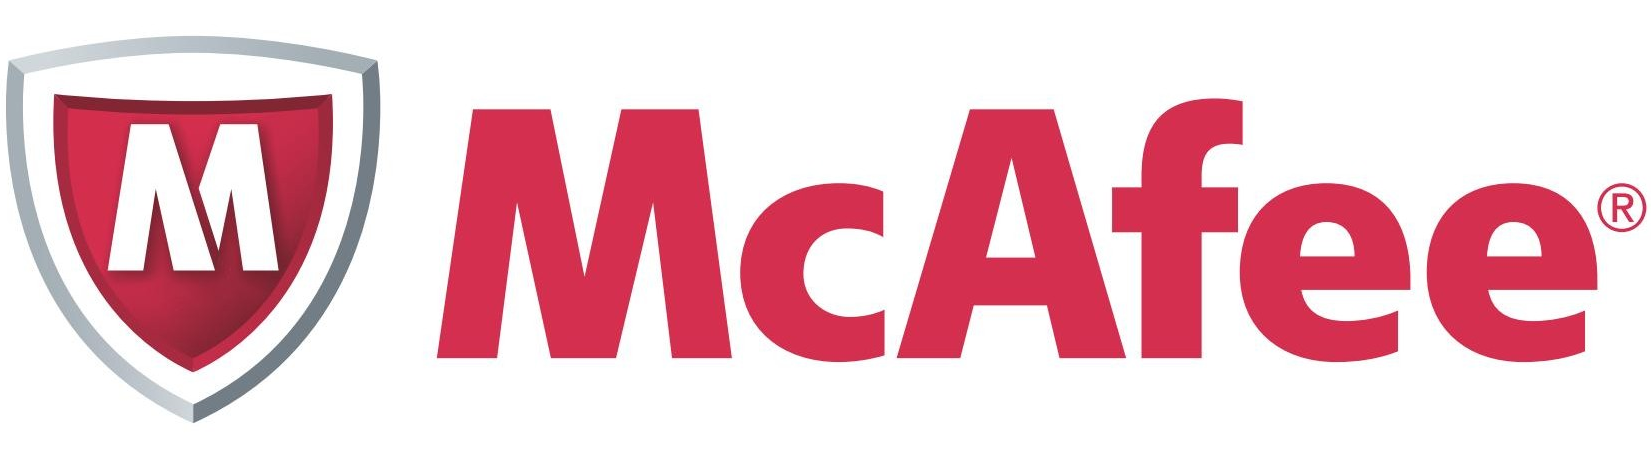 McAfee Solution Services - Technology Training Course